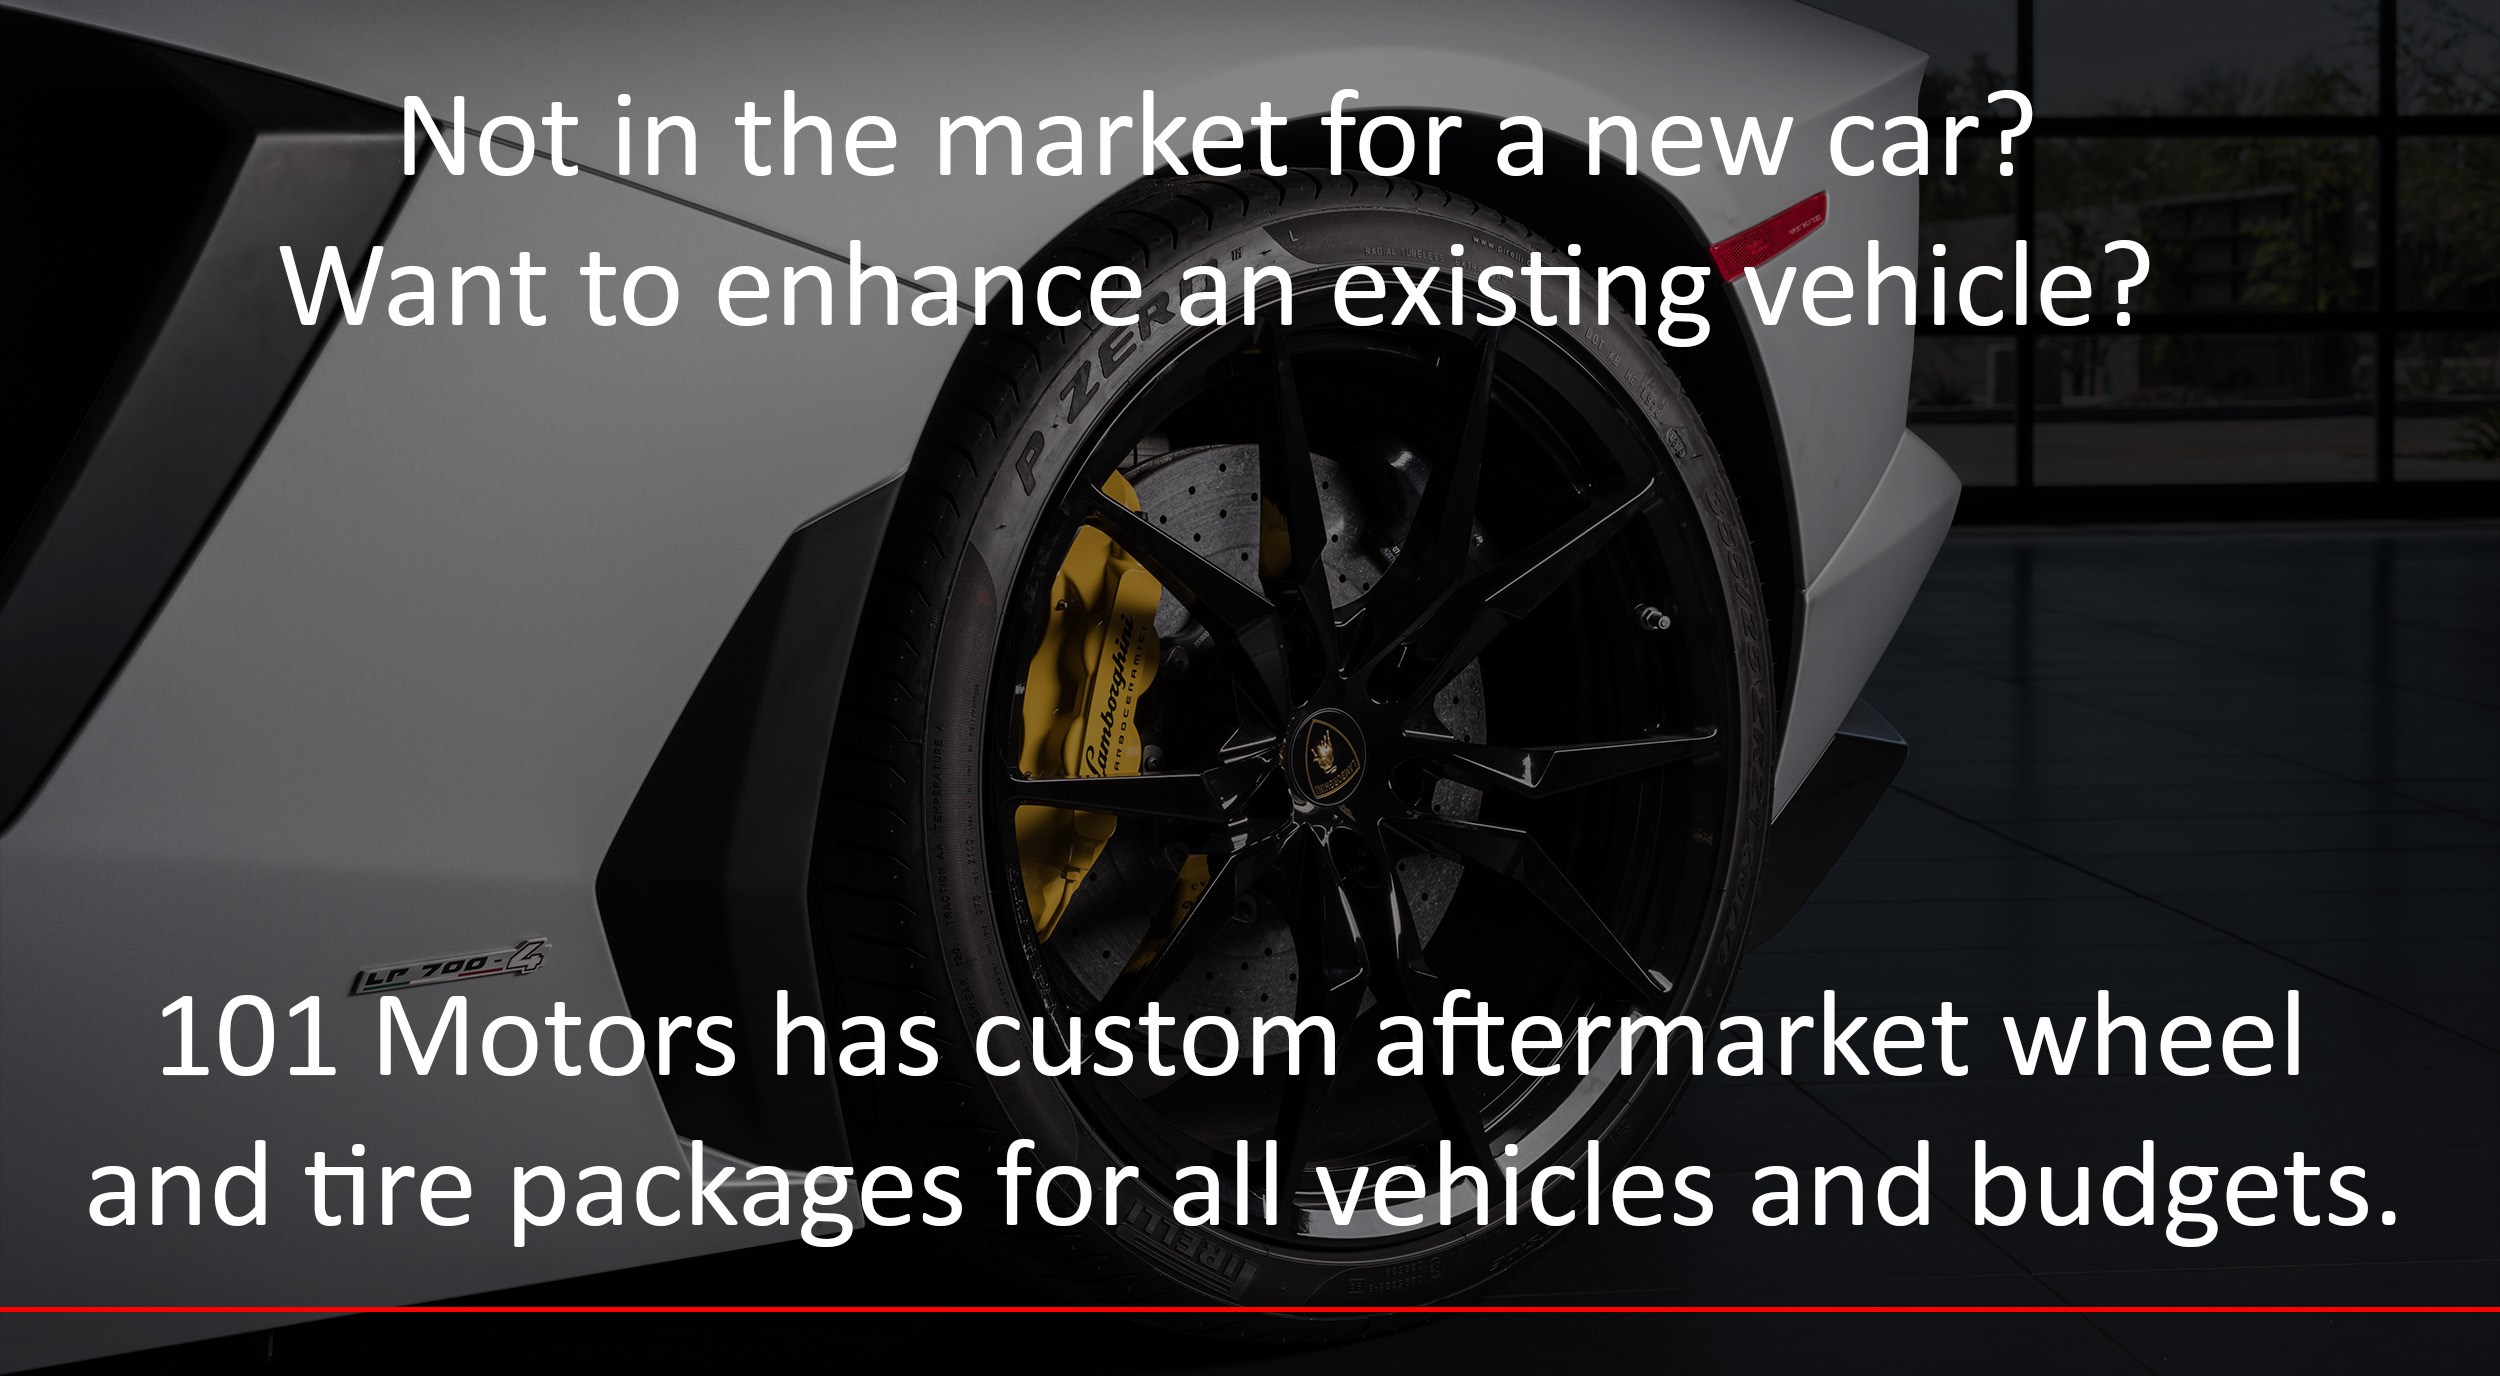 Not in the market for a new car? Want to enhance an existing vehicle? 101 Motors has custom aftermarket wheel and tire packages for all vehicles and budgets.